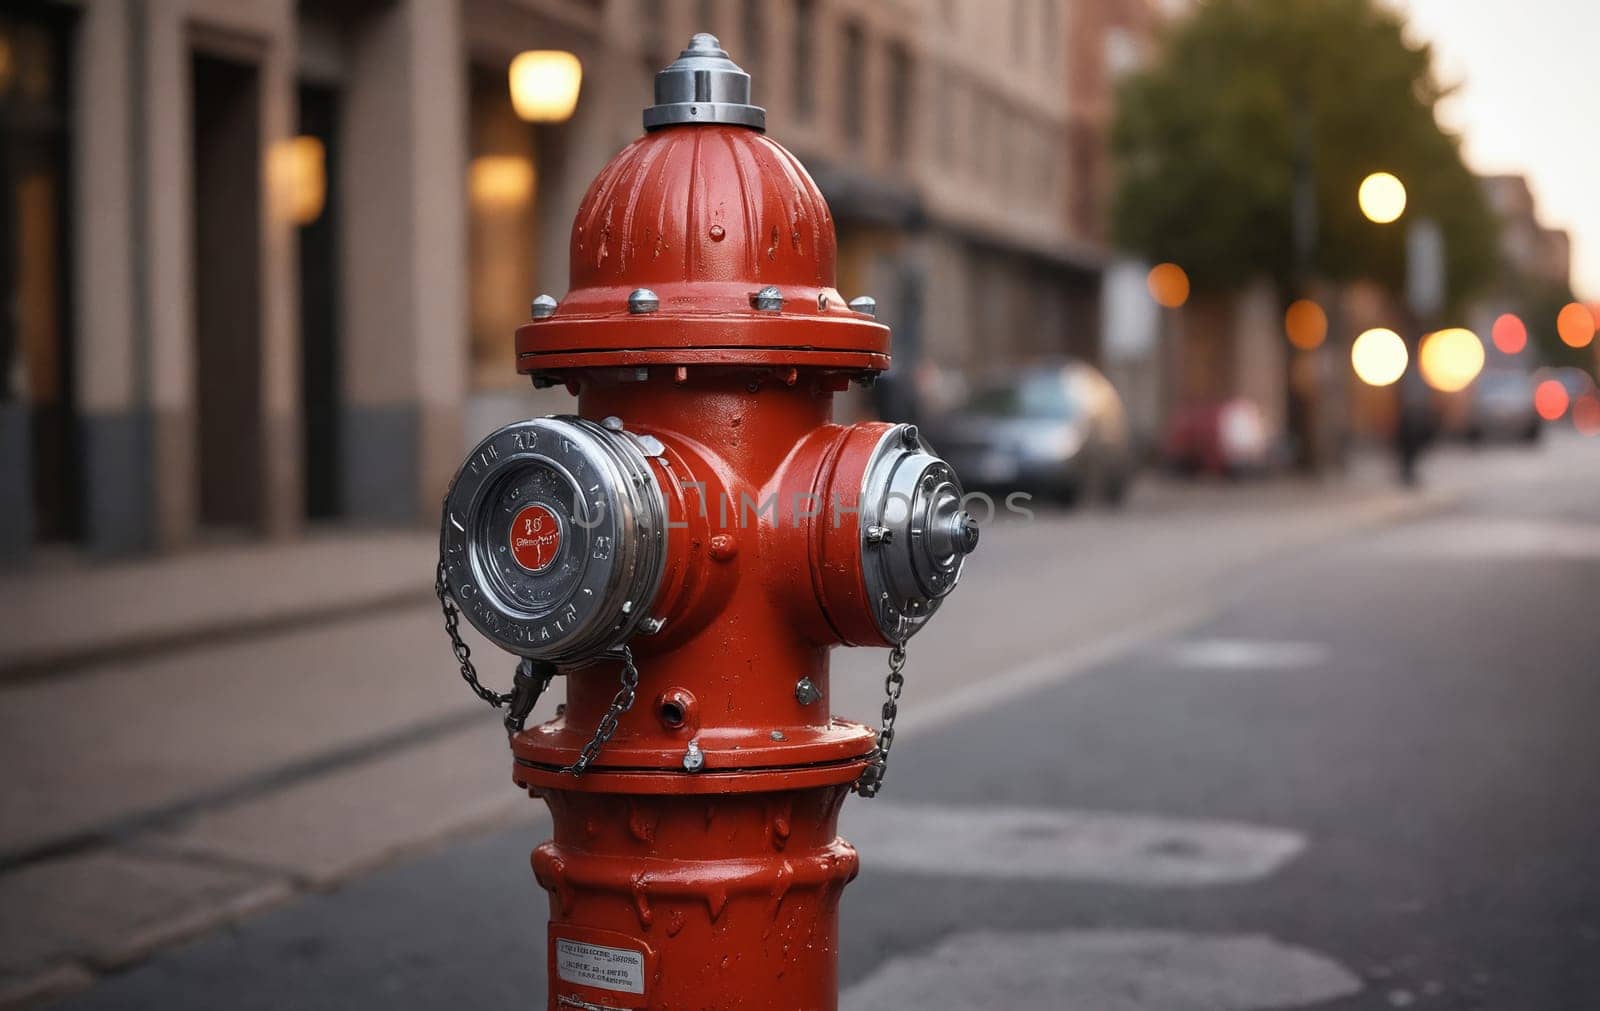 Out in the Open: Fire Hydrant Awaits Its Call by Andre1ns